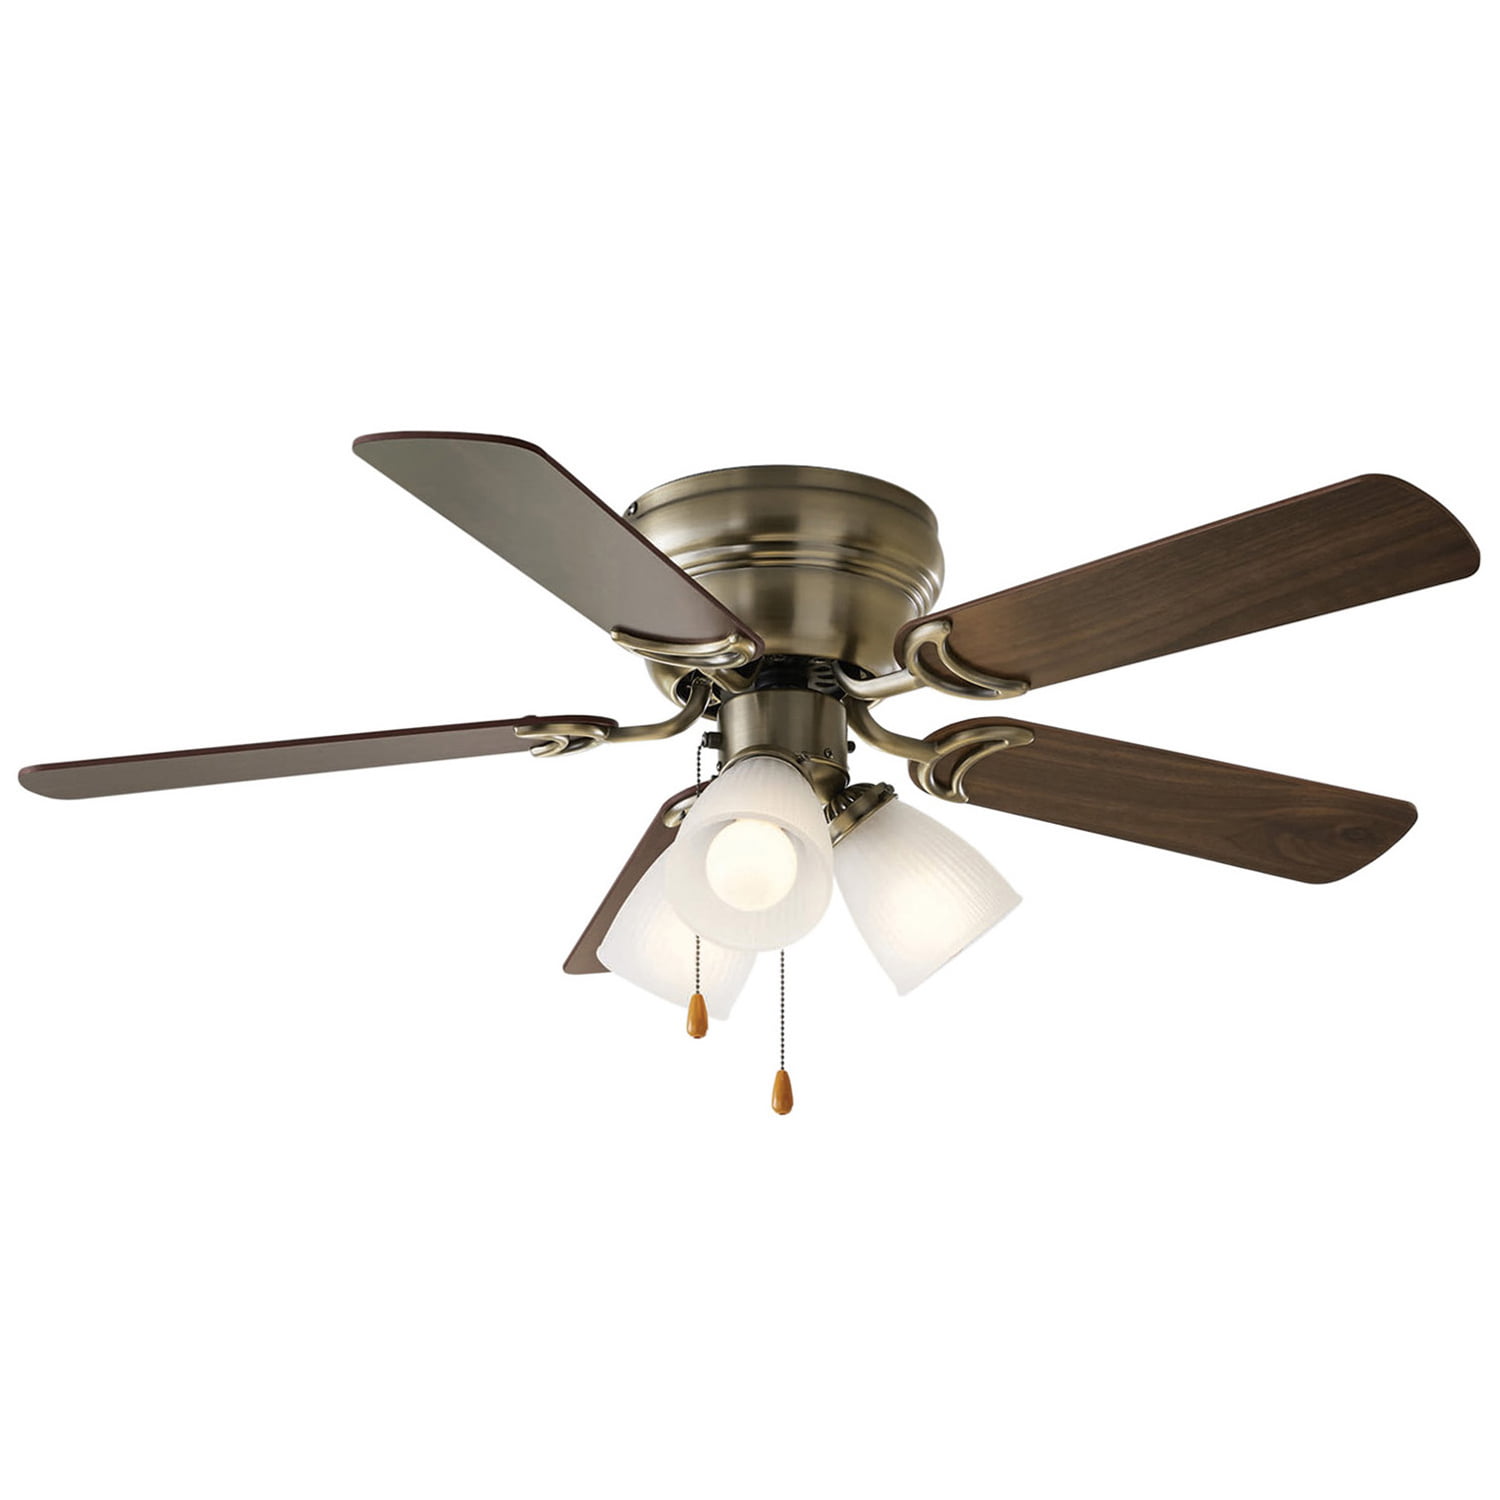 Chapter 42" Polished Brass Indoor Flush Mount 5 Blade Ceiling Fan with